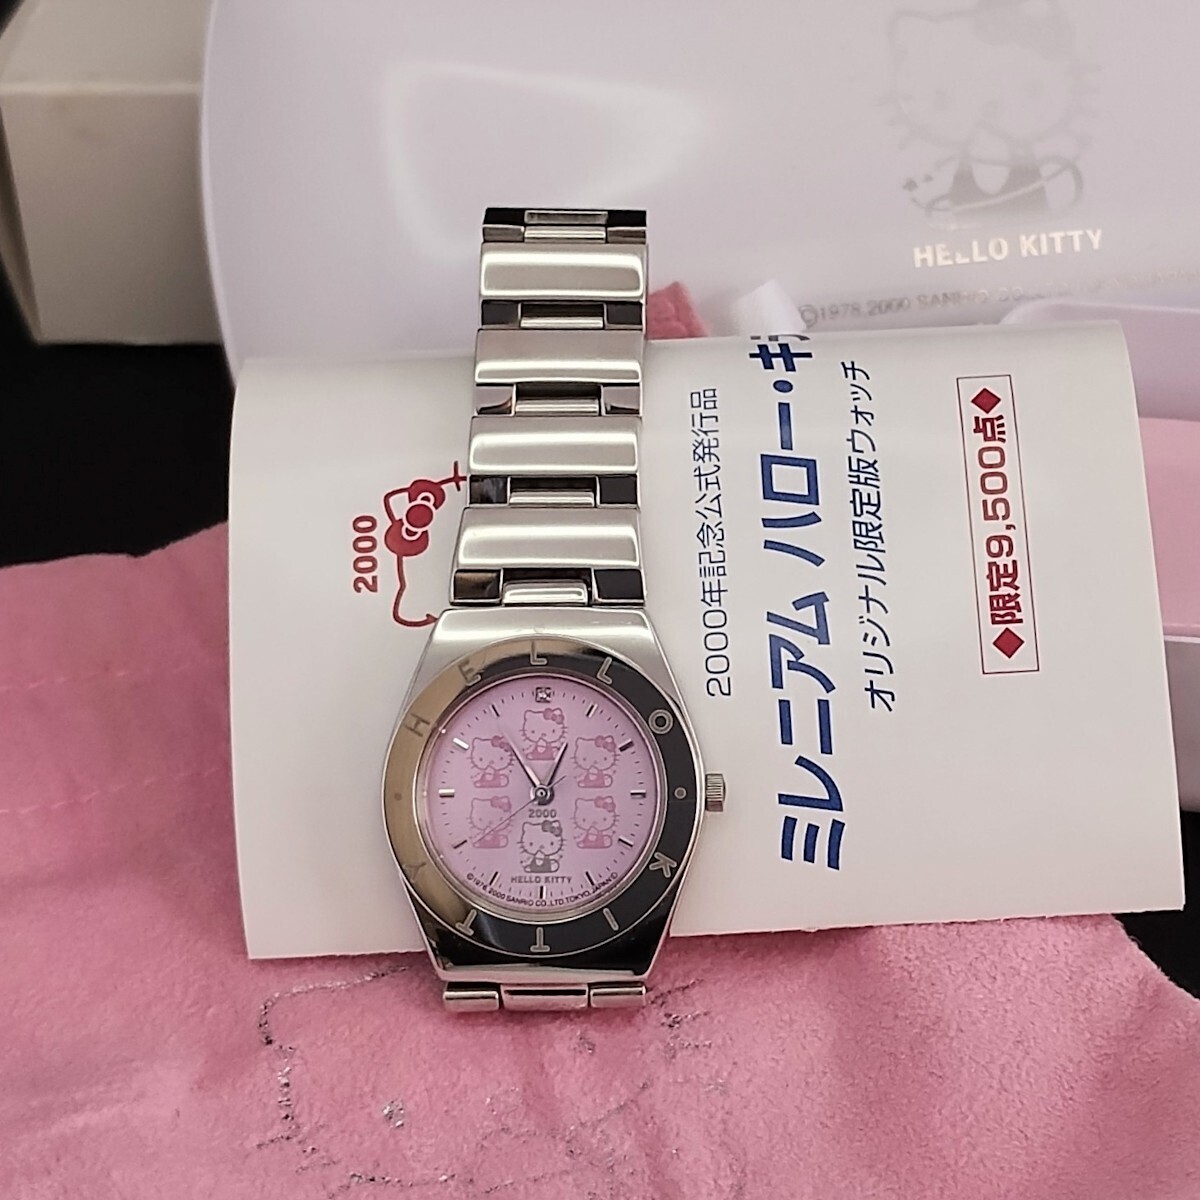 HELLO KITTY millenium Hello Kitty 2000 year memory official issue goods limitation version watch lady's wristwatch Sanrio rare Vintage 